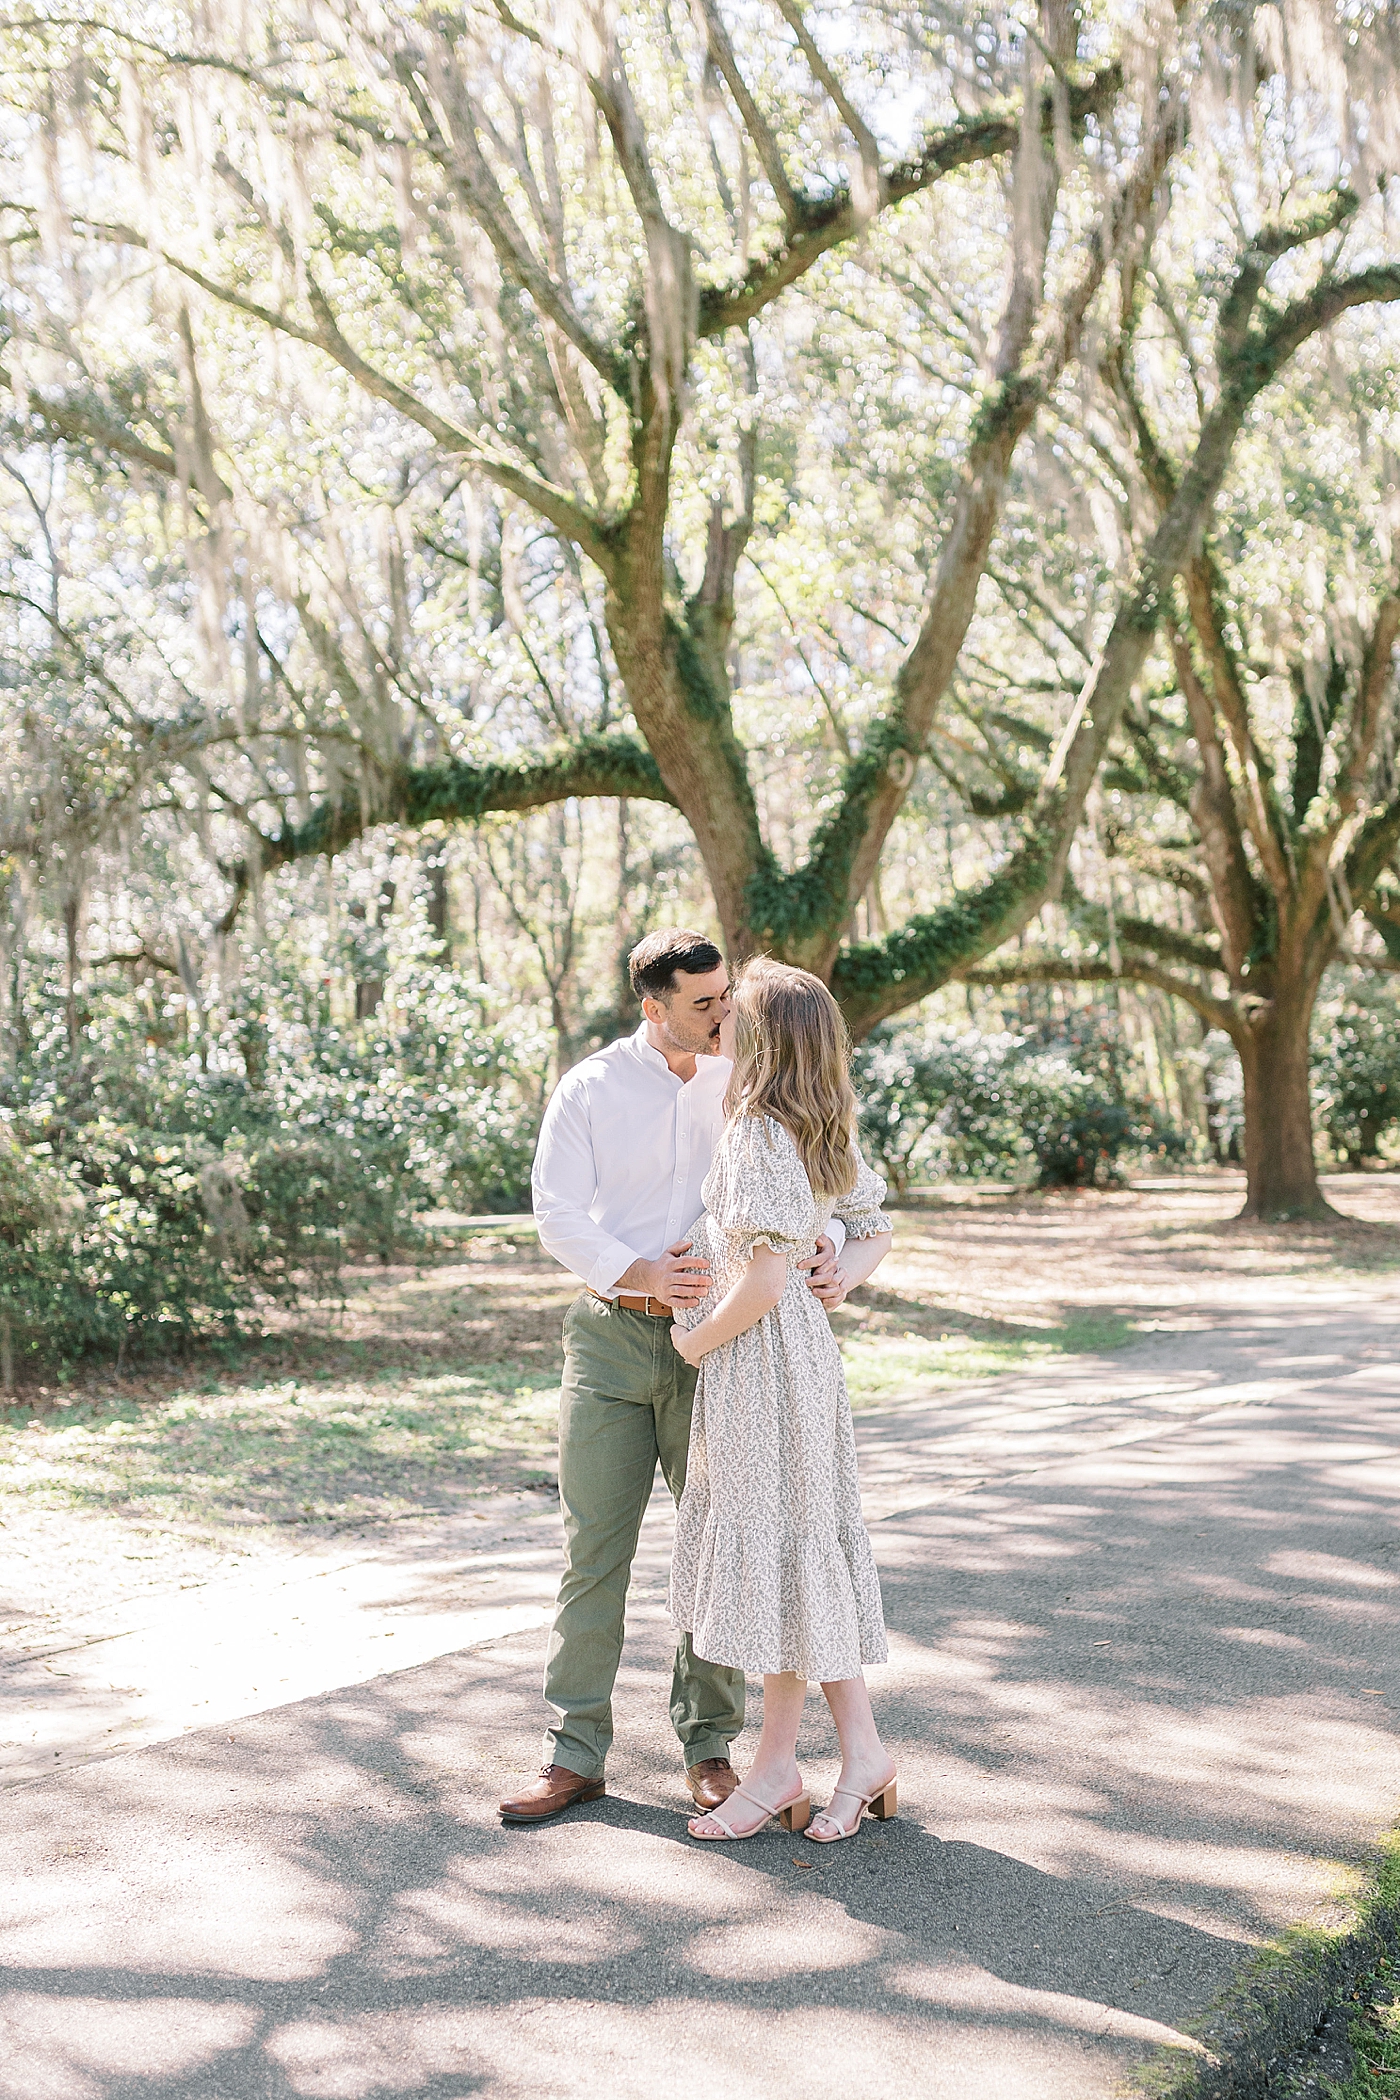 Mom and dad to be kissing under trees with spanish moss | Image by Caitlyn Motycka Photography